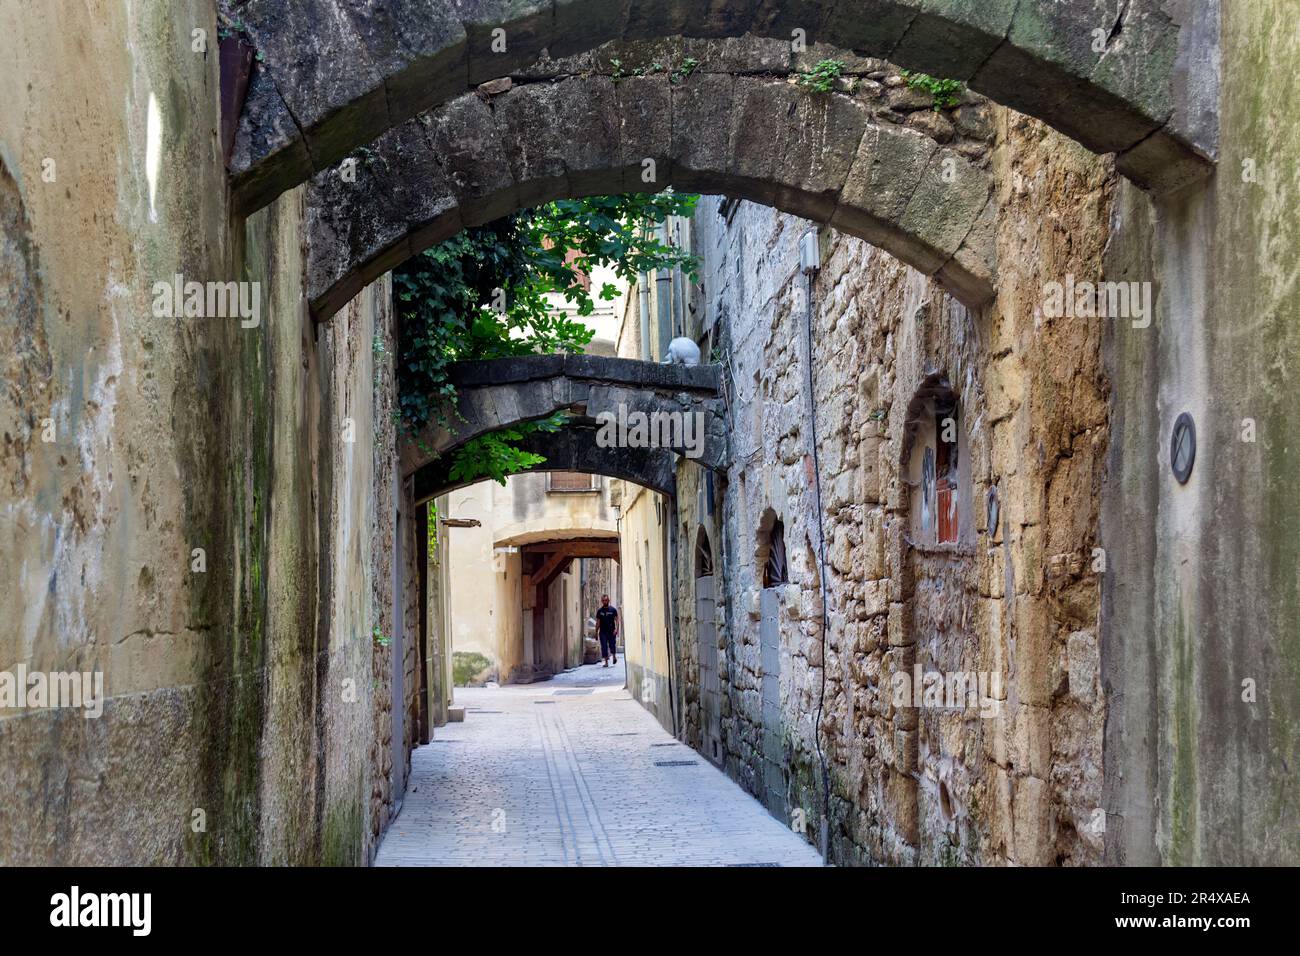 SOMMIERES, FRANCE - JULY 14th, 2018: View of a paved street in Sommières, Occitanie, South of France Stock Photo